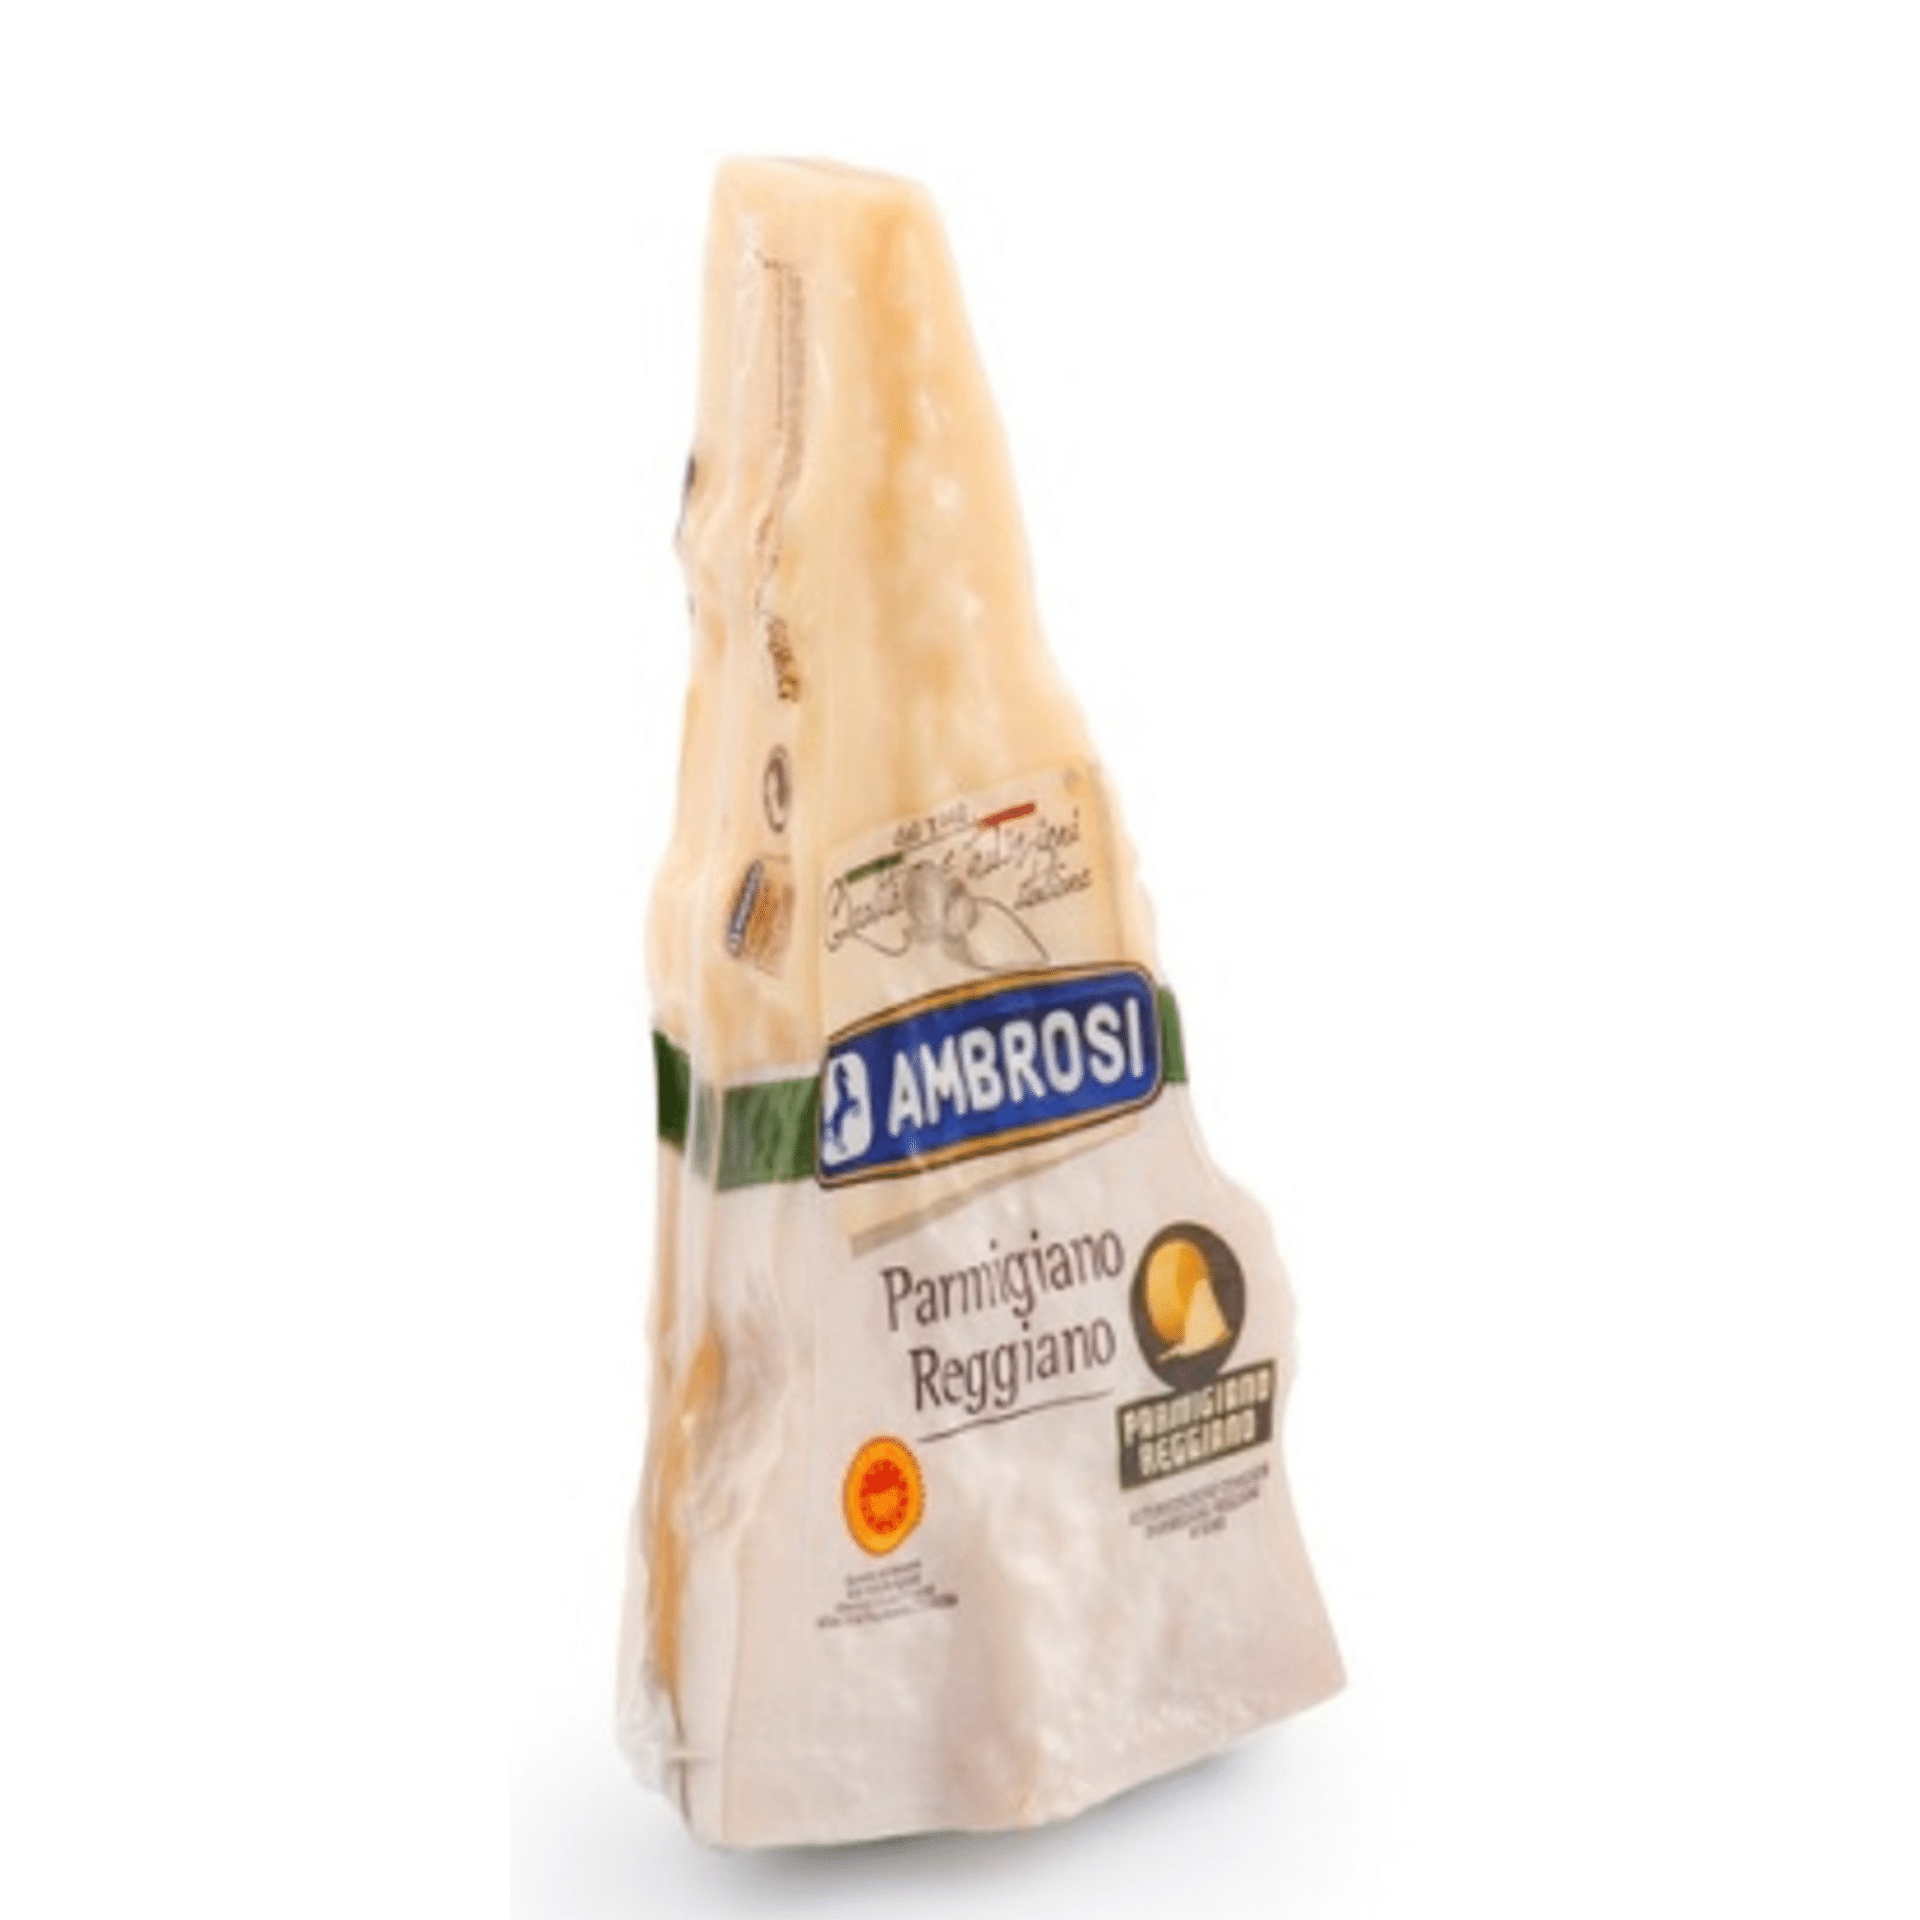 Tasty Ribbon Parmigiano Reggiano 24 Months D.O.P. Wedge